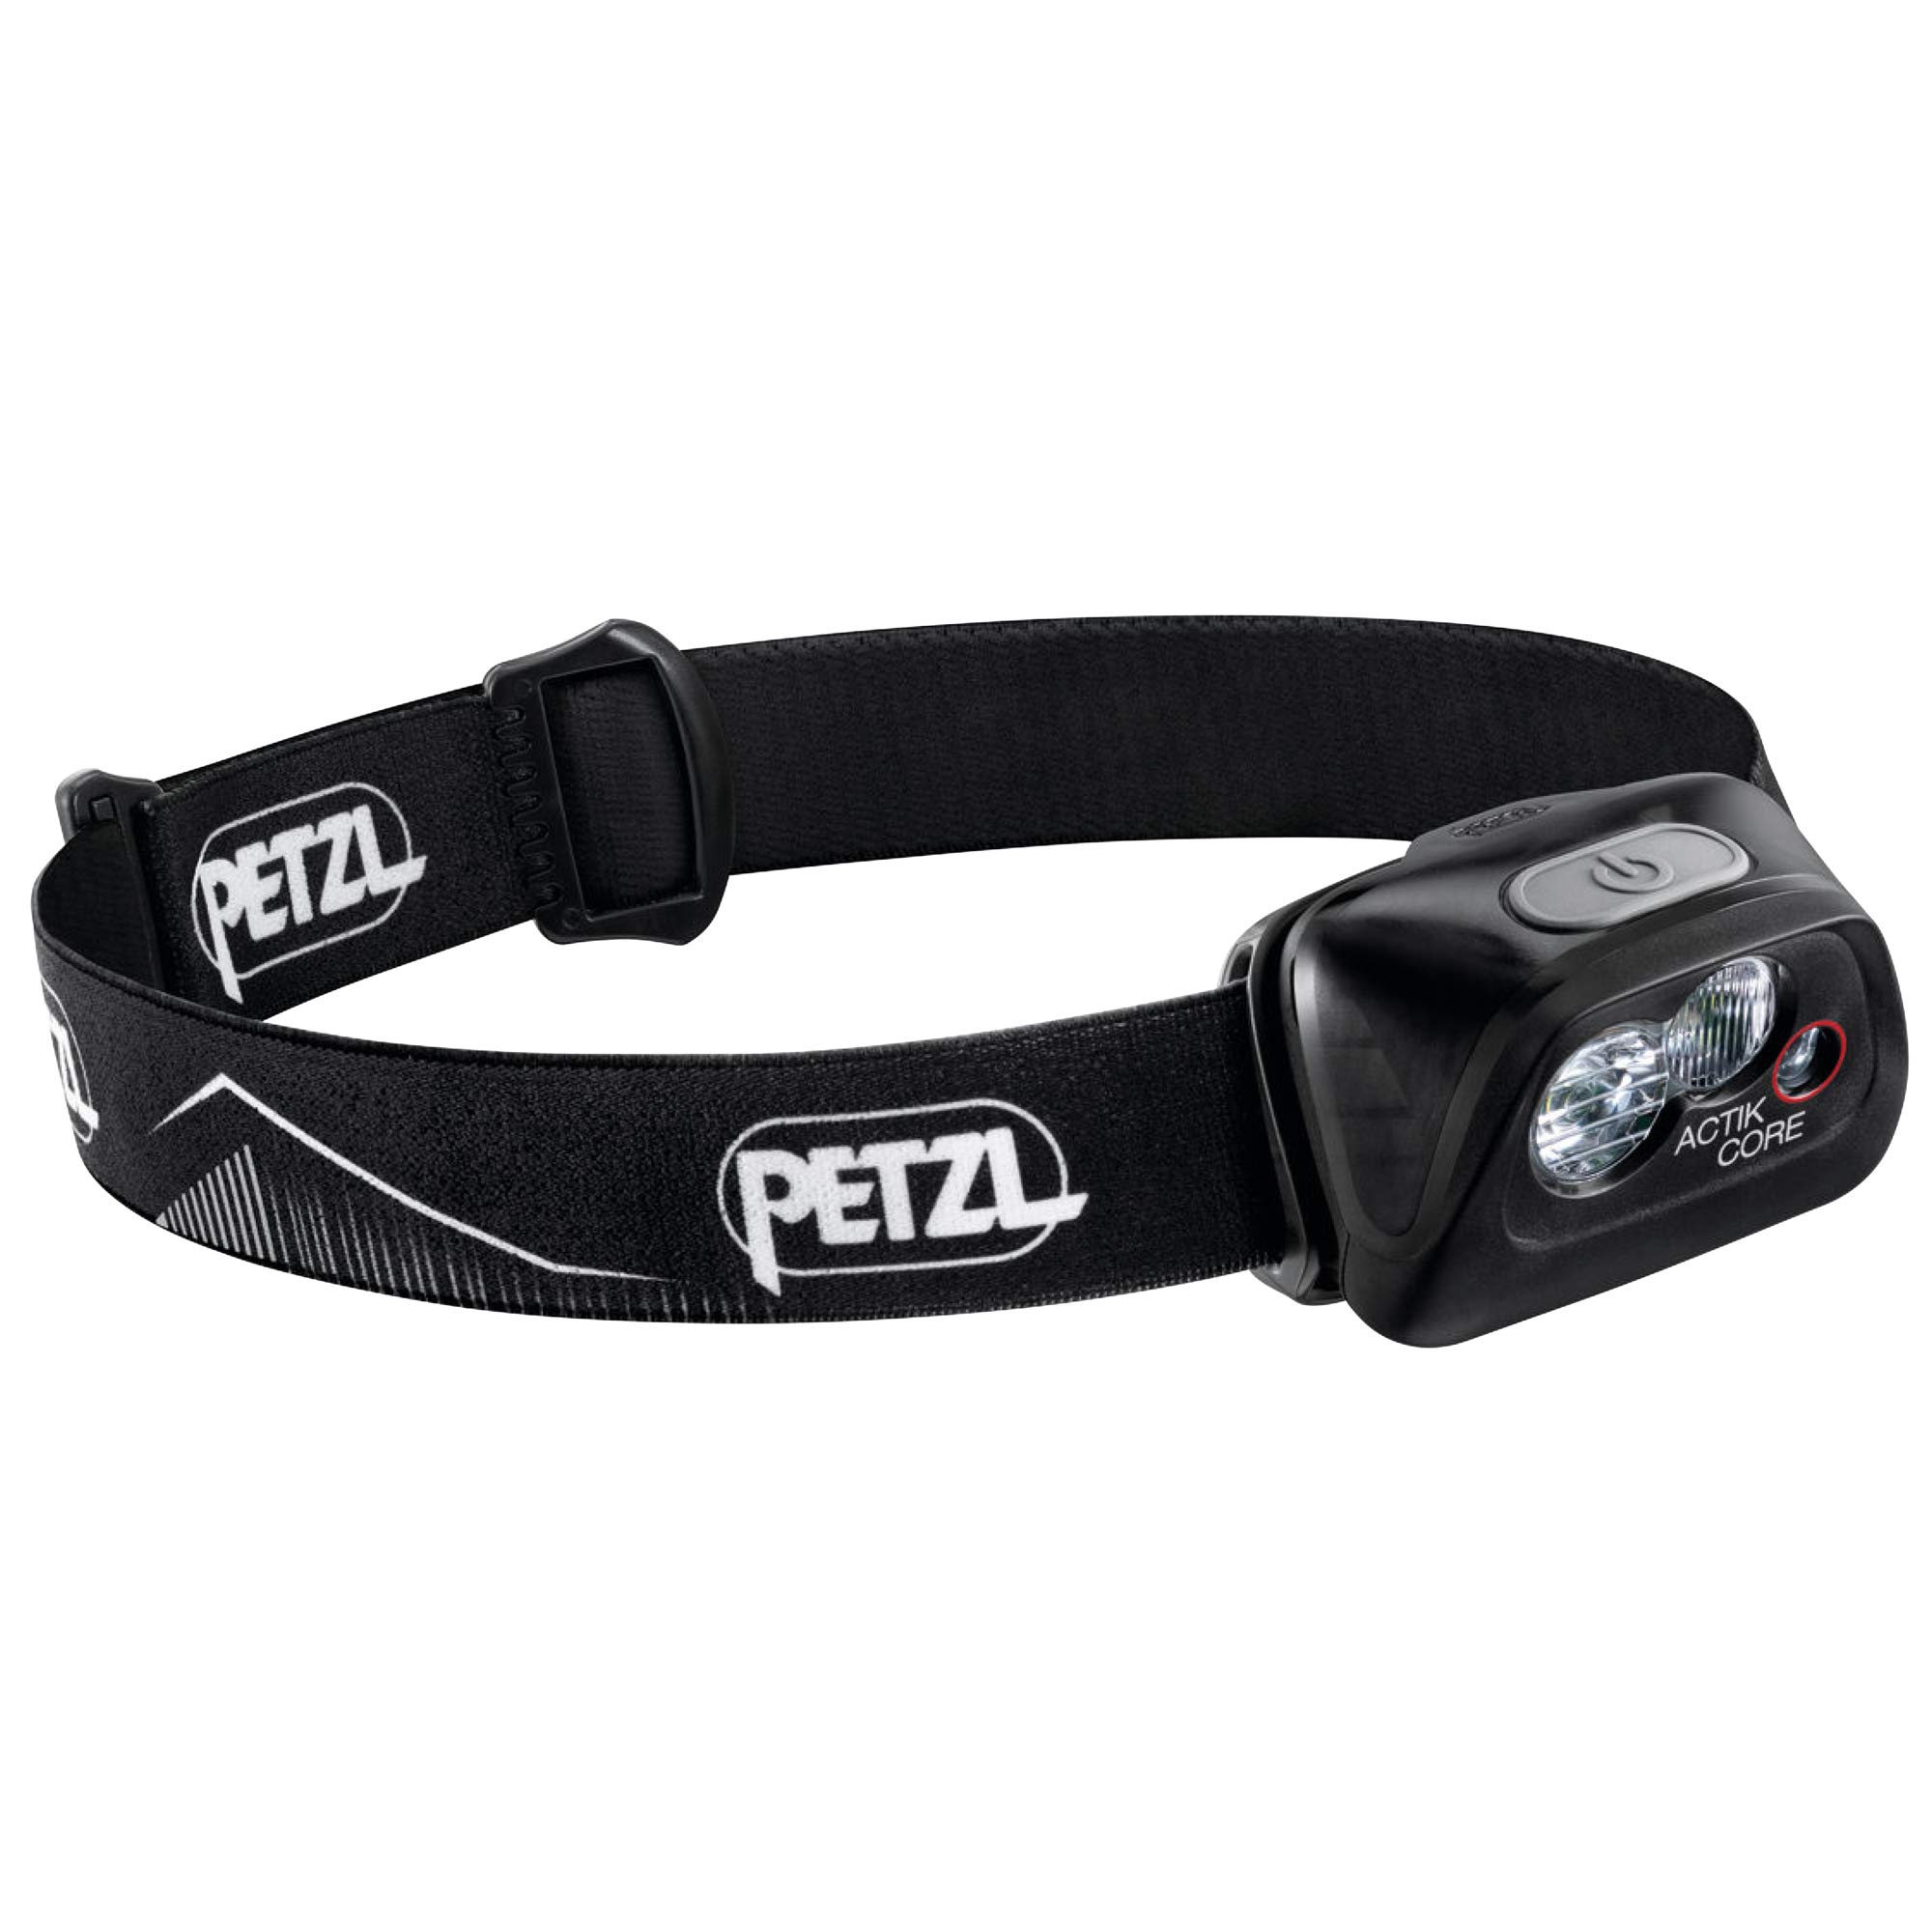 Petzl ACTIK CORE Headlamp - Powerful, Rechargeable 600 Lumen Light with Red Lighting for Hiking, Climbing, and Camping